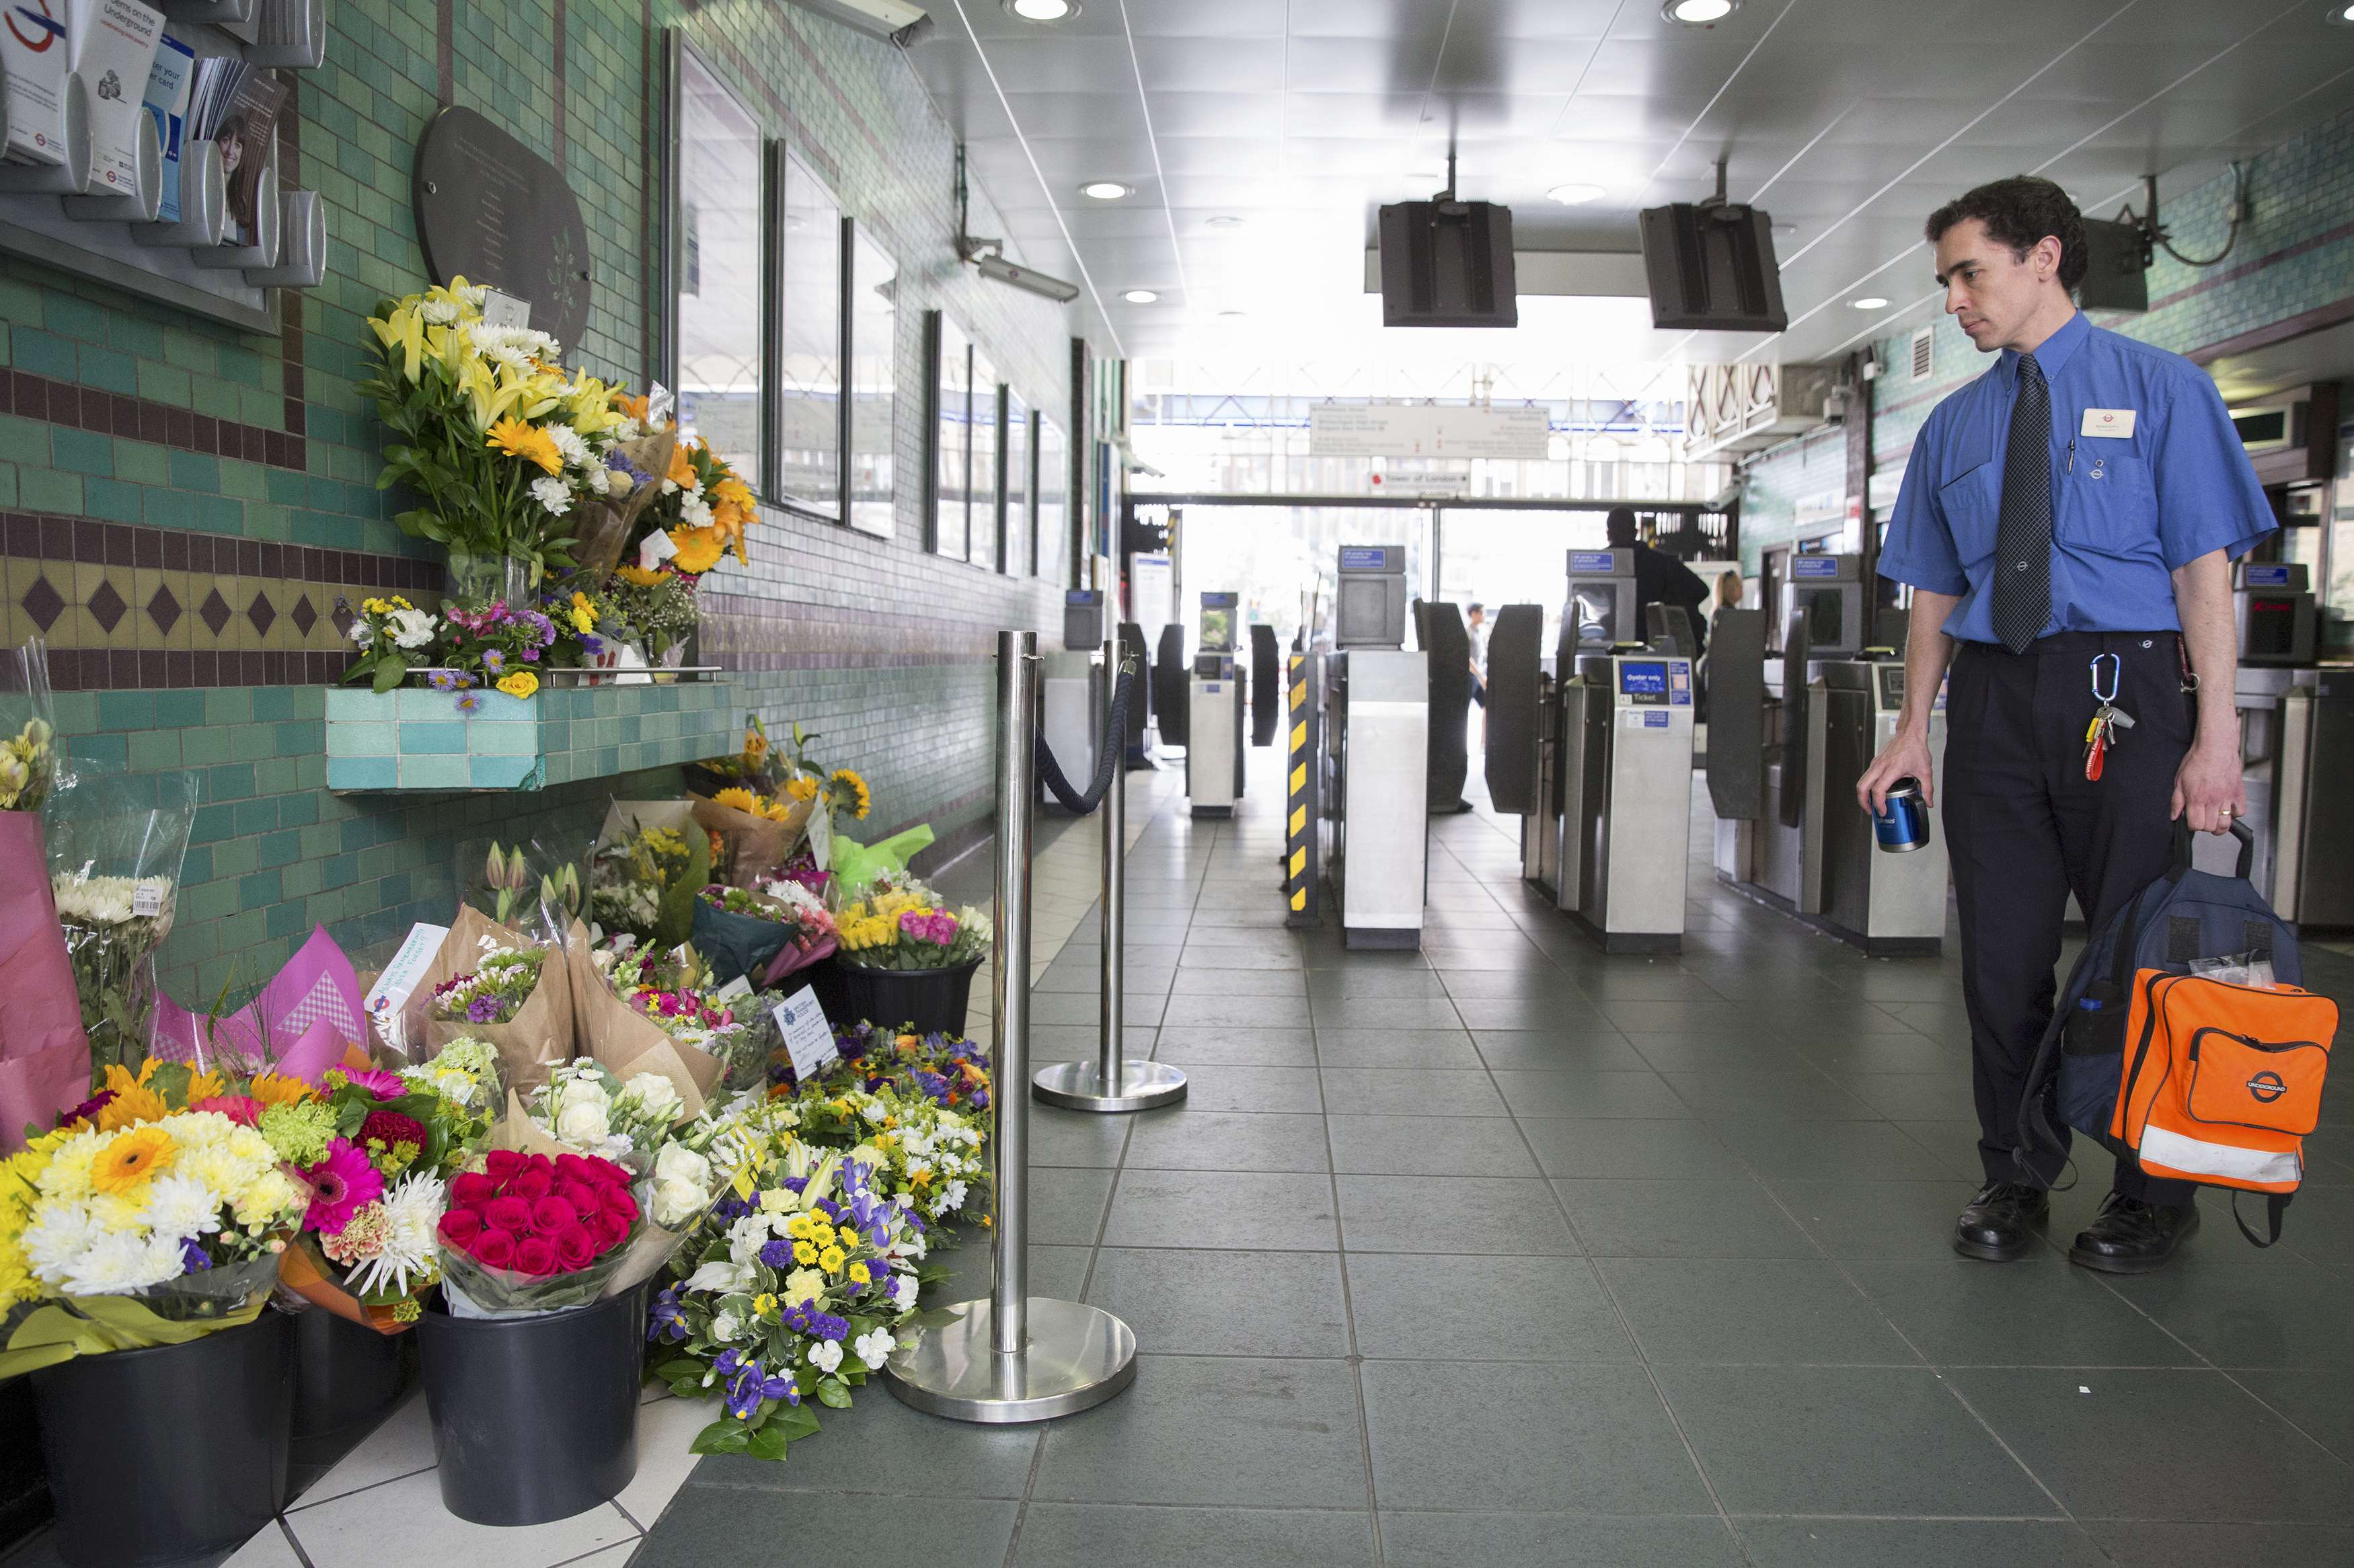 A tube worker looks at floral tributes for victims of the July 7, 2005 London bombings at Aldgate Station in London, Britain July 7, 2015.